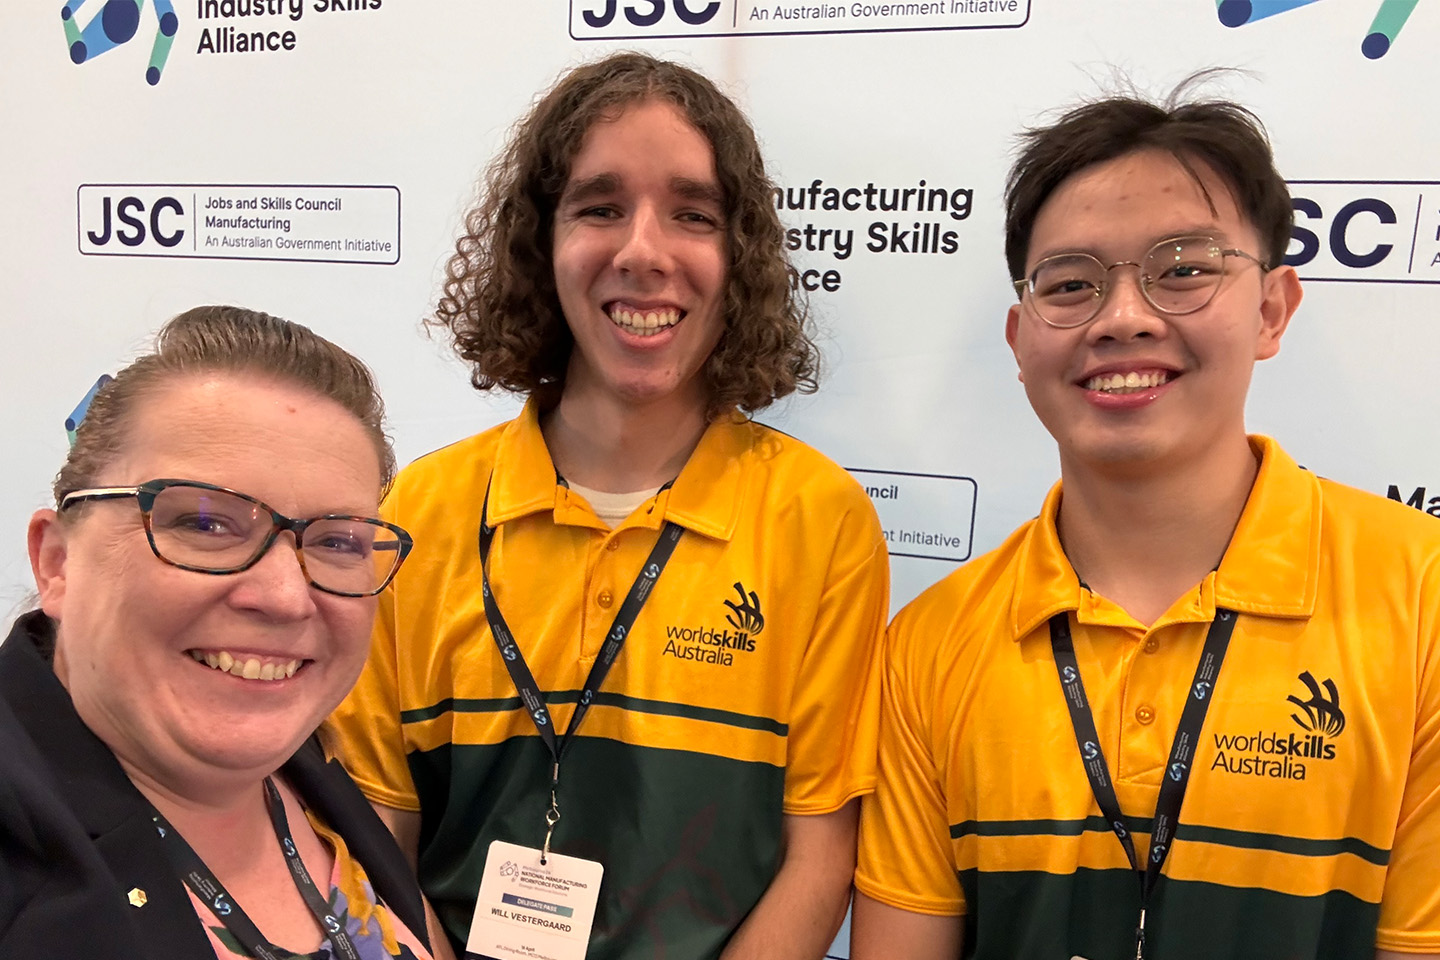 Jenny Mitchell taking a selfie with two student engineers in yellow shirts